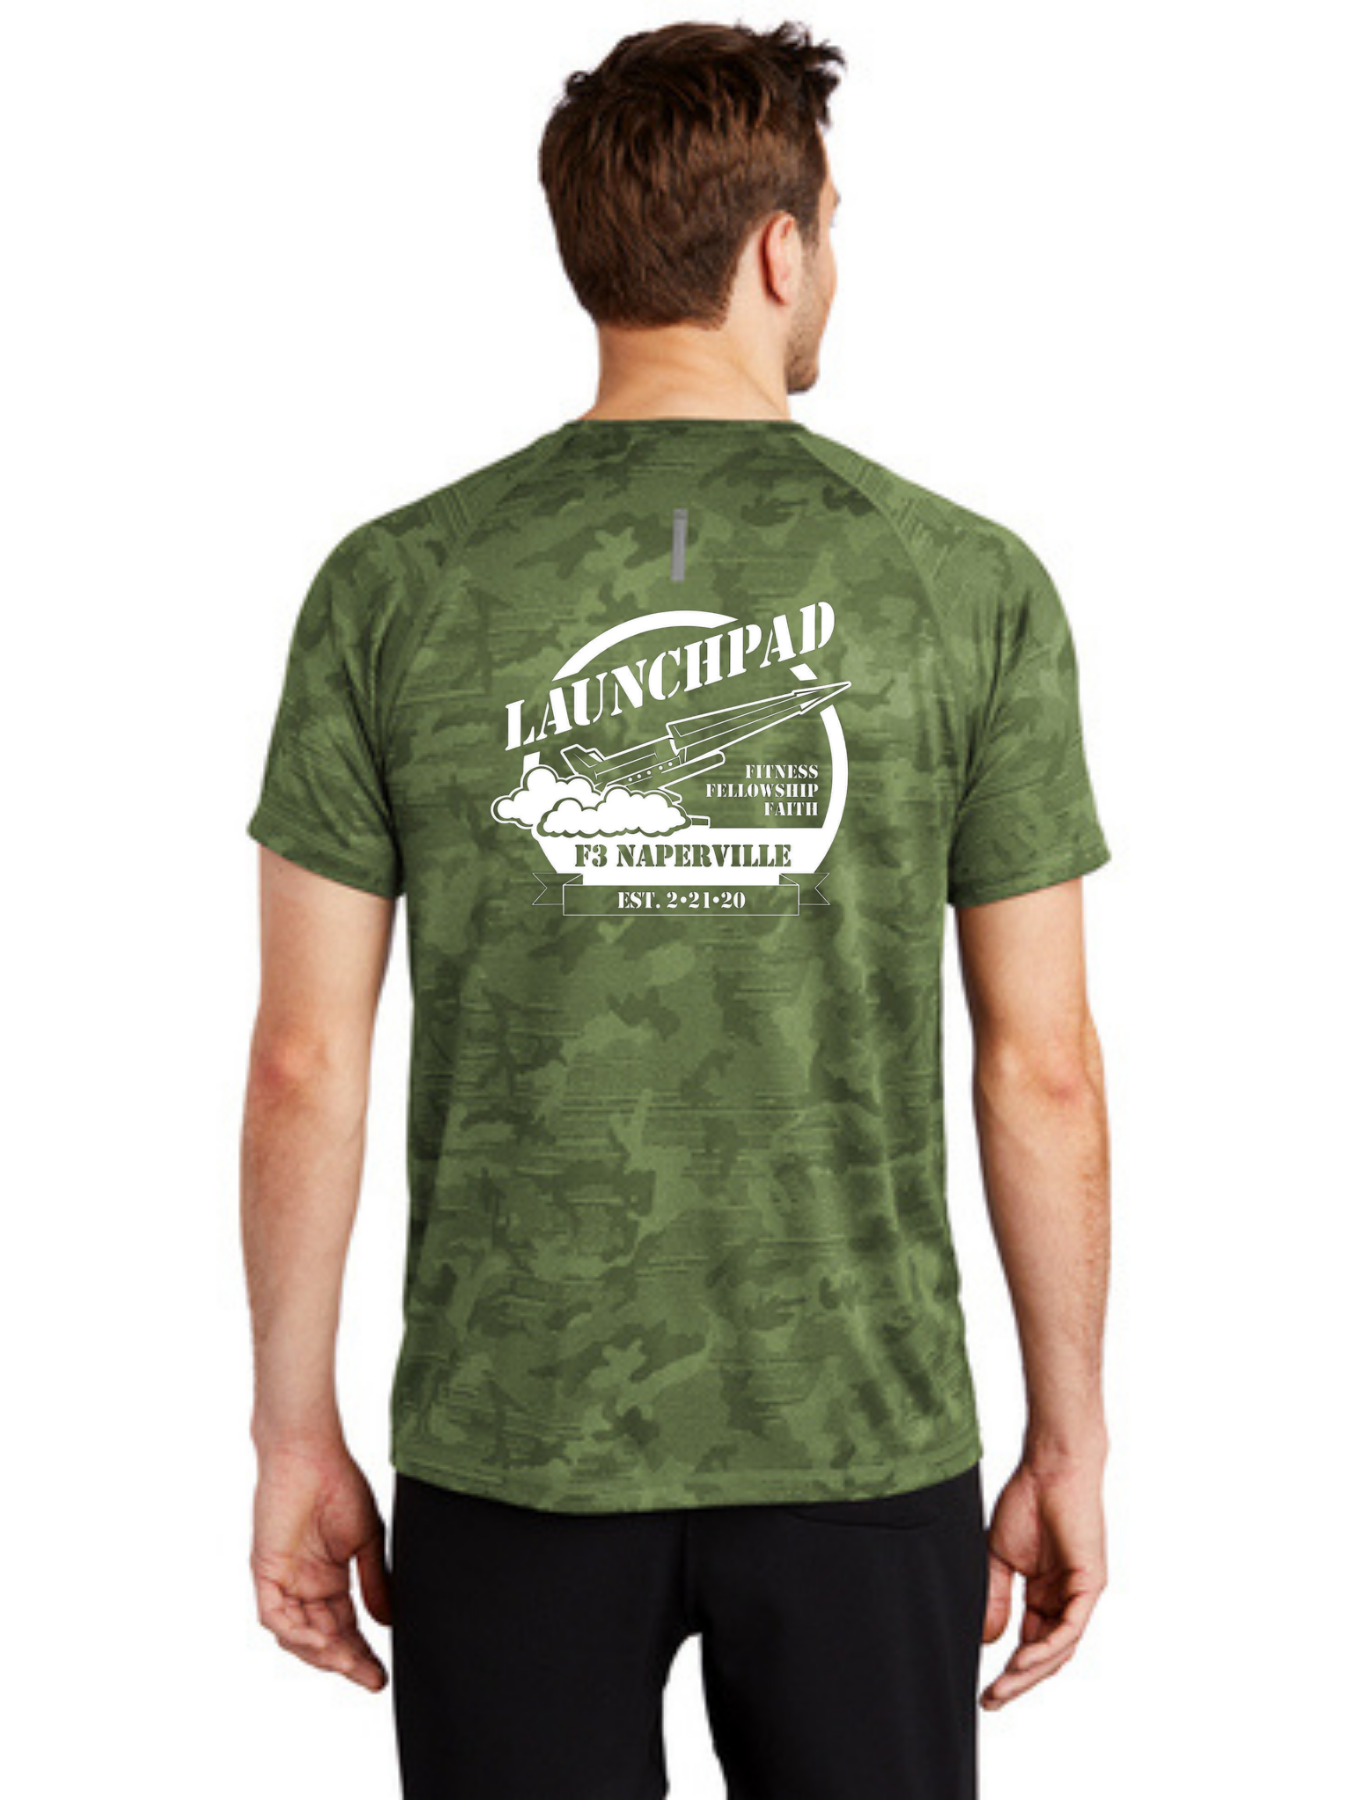 F3 Naperville Launchpad Pre-Order May 2022